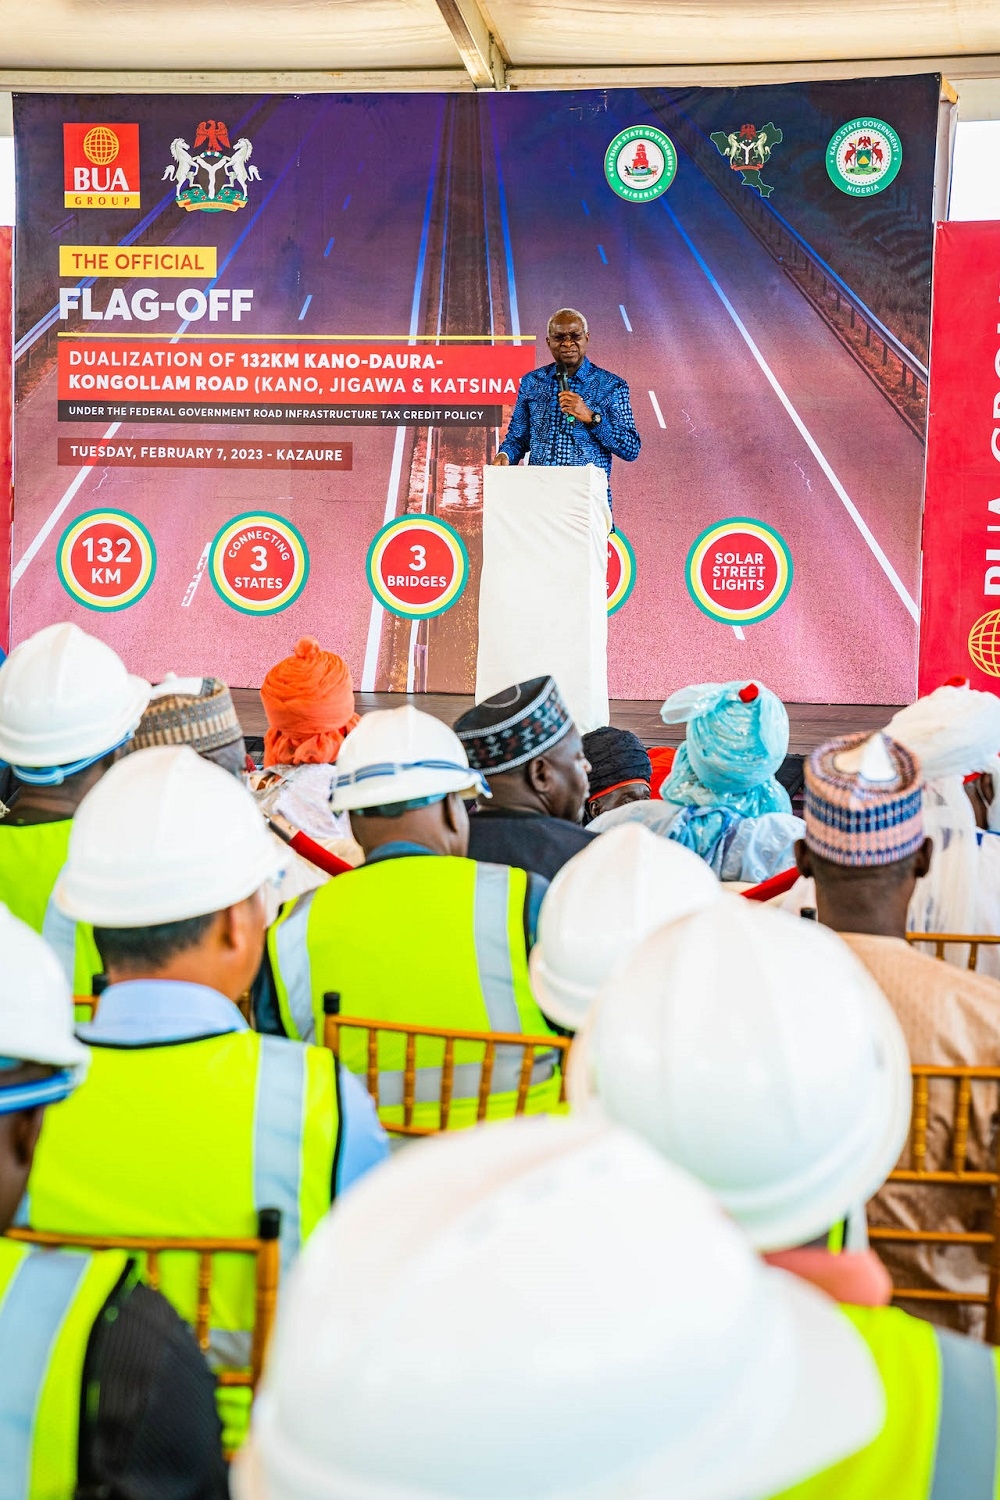 Hon. Minister of Works and Housing, Mr. Babatunde Fashola, SAN speaking during   the official Flag - off of the Dualization of the 132KM Kano - Daura - Kongollam Road in Kano, Jigawa and Katsina States under the Federal Government Road Infrastructure Development and Refurbishment Tax Credit Scheme on Tuesday, 7th February 2023. 